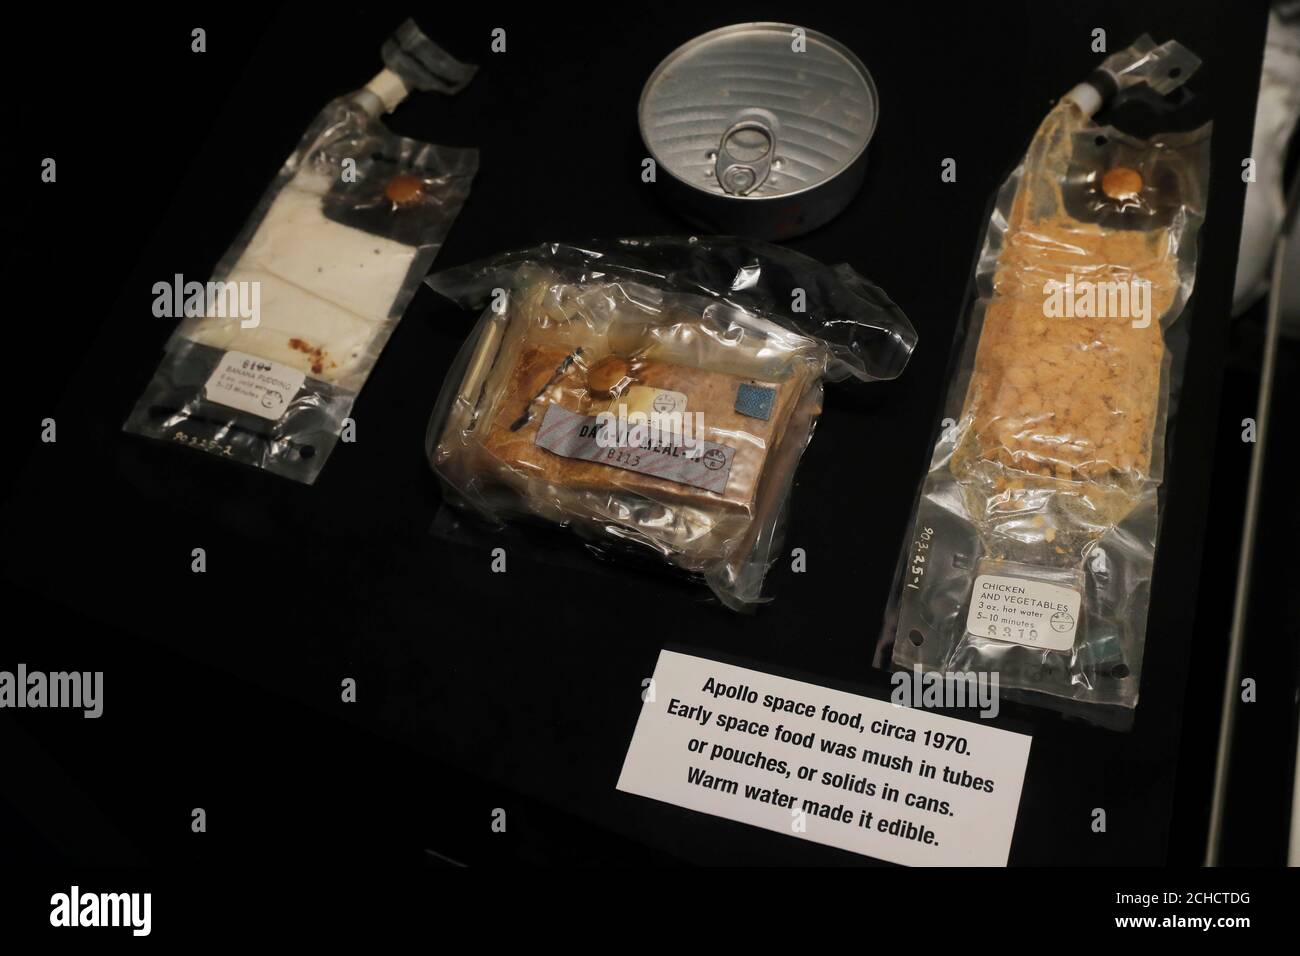 Examples of space food used during the Apollo missions are displayed at the Cradle of Aviation Museum in Garden City, New York, U.S., July 17, 2019. REUTERS/Lucas Jackson Stock Photo